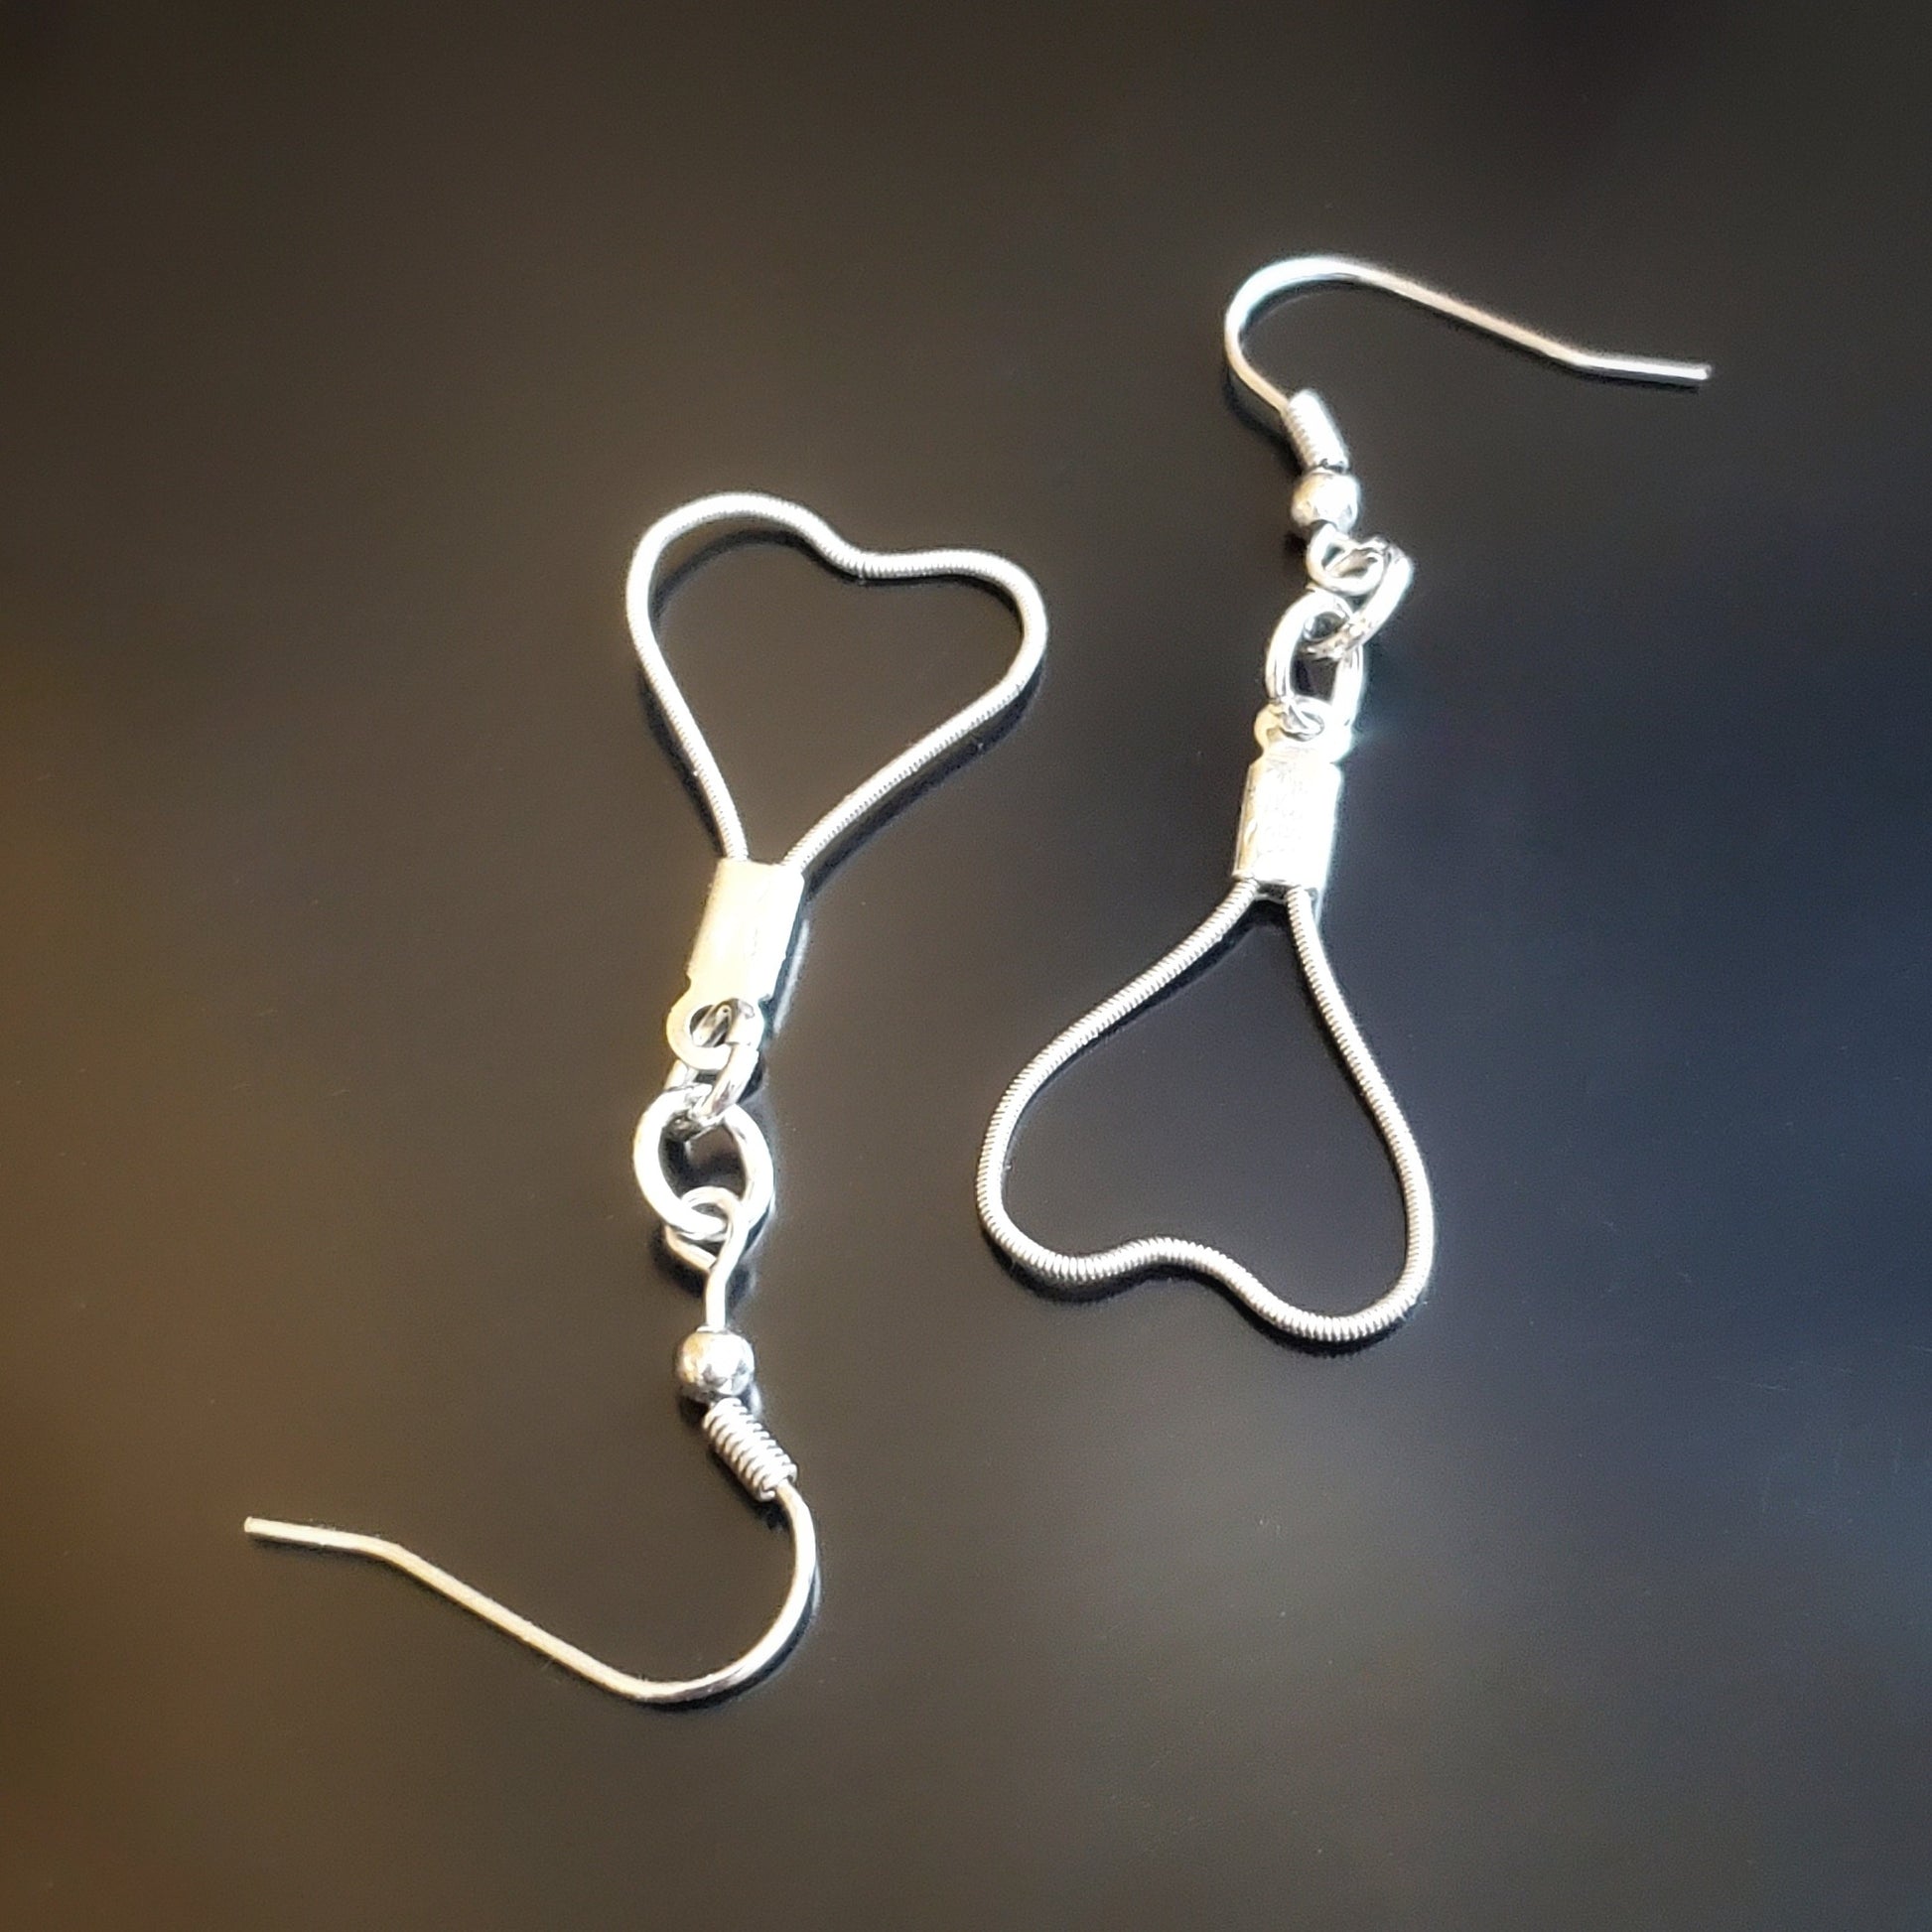 pair of heart shaped earrings made from upcycled guitar strings 